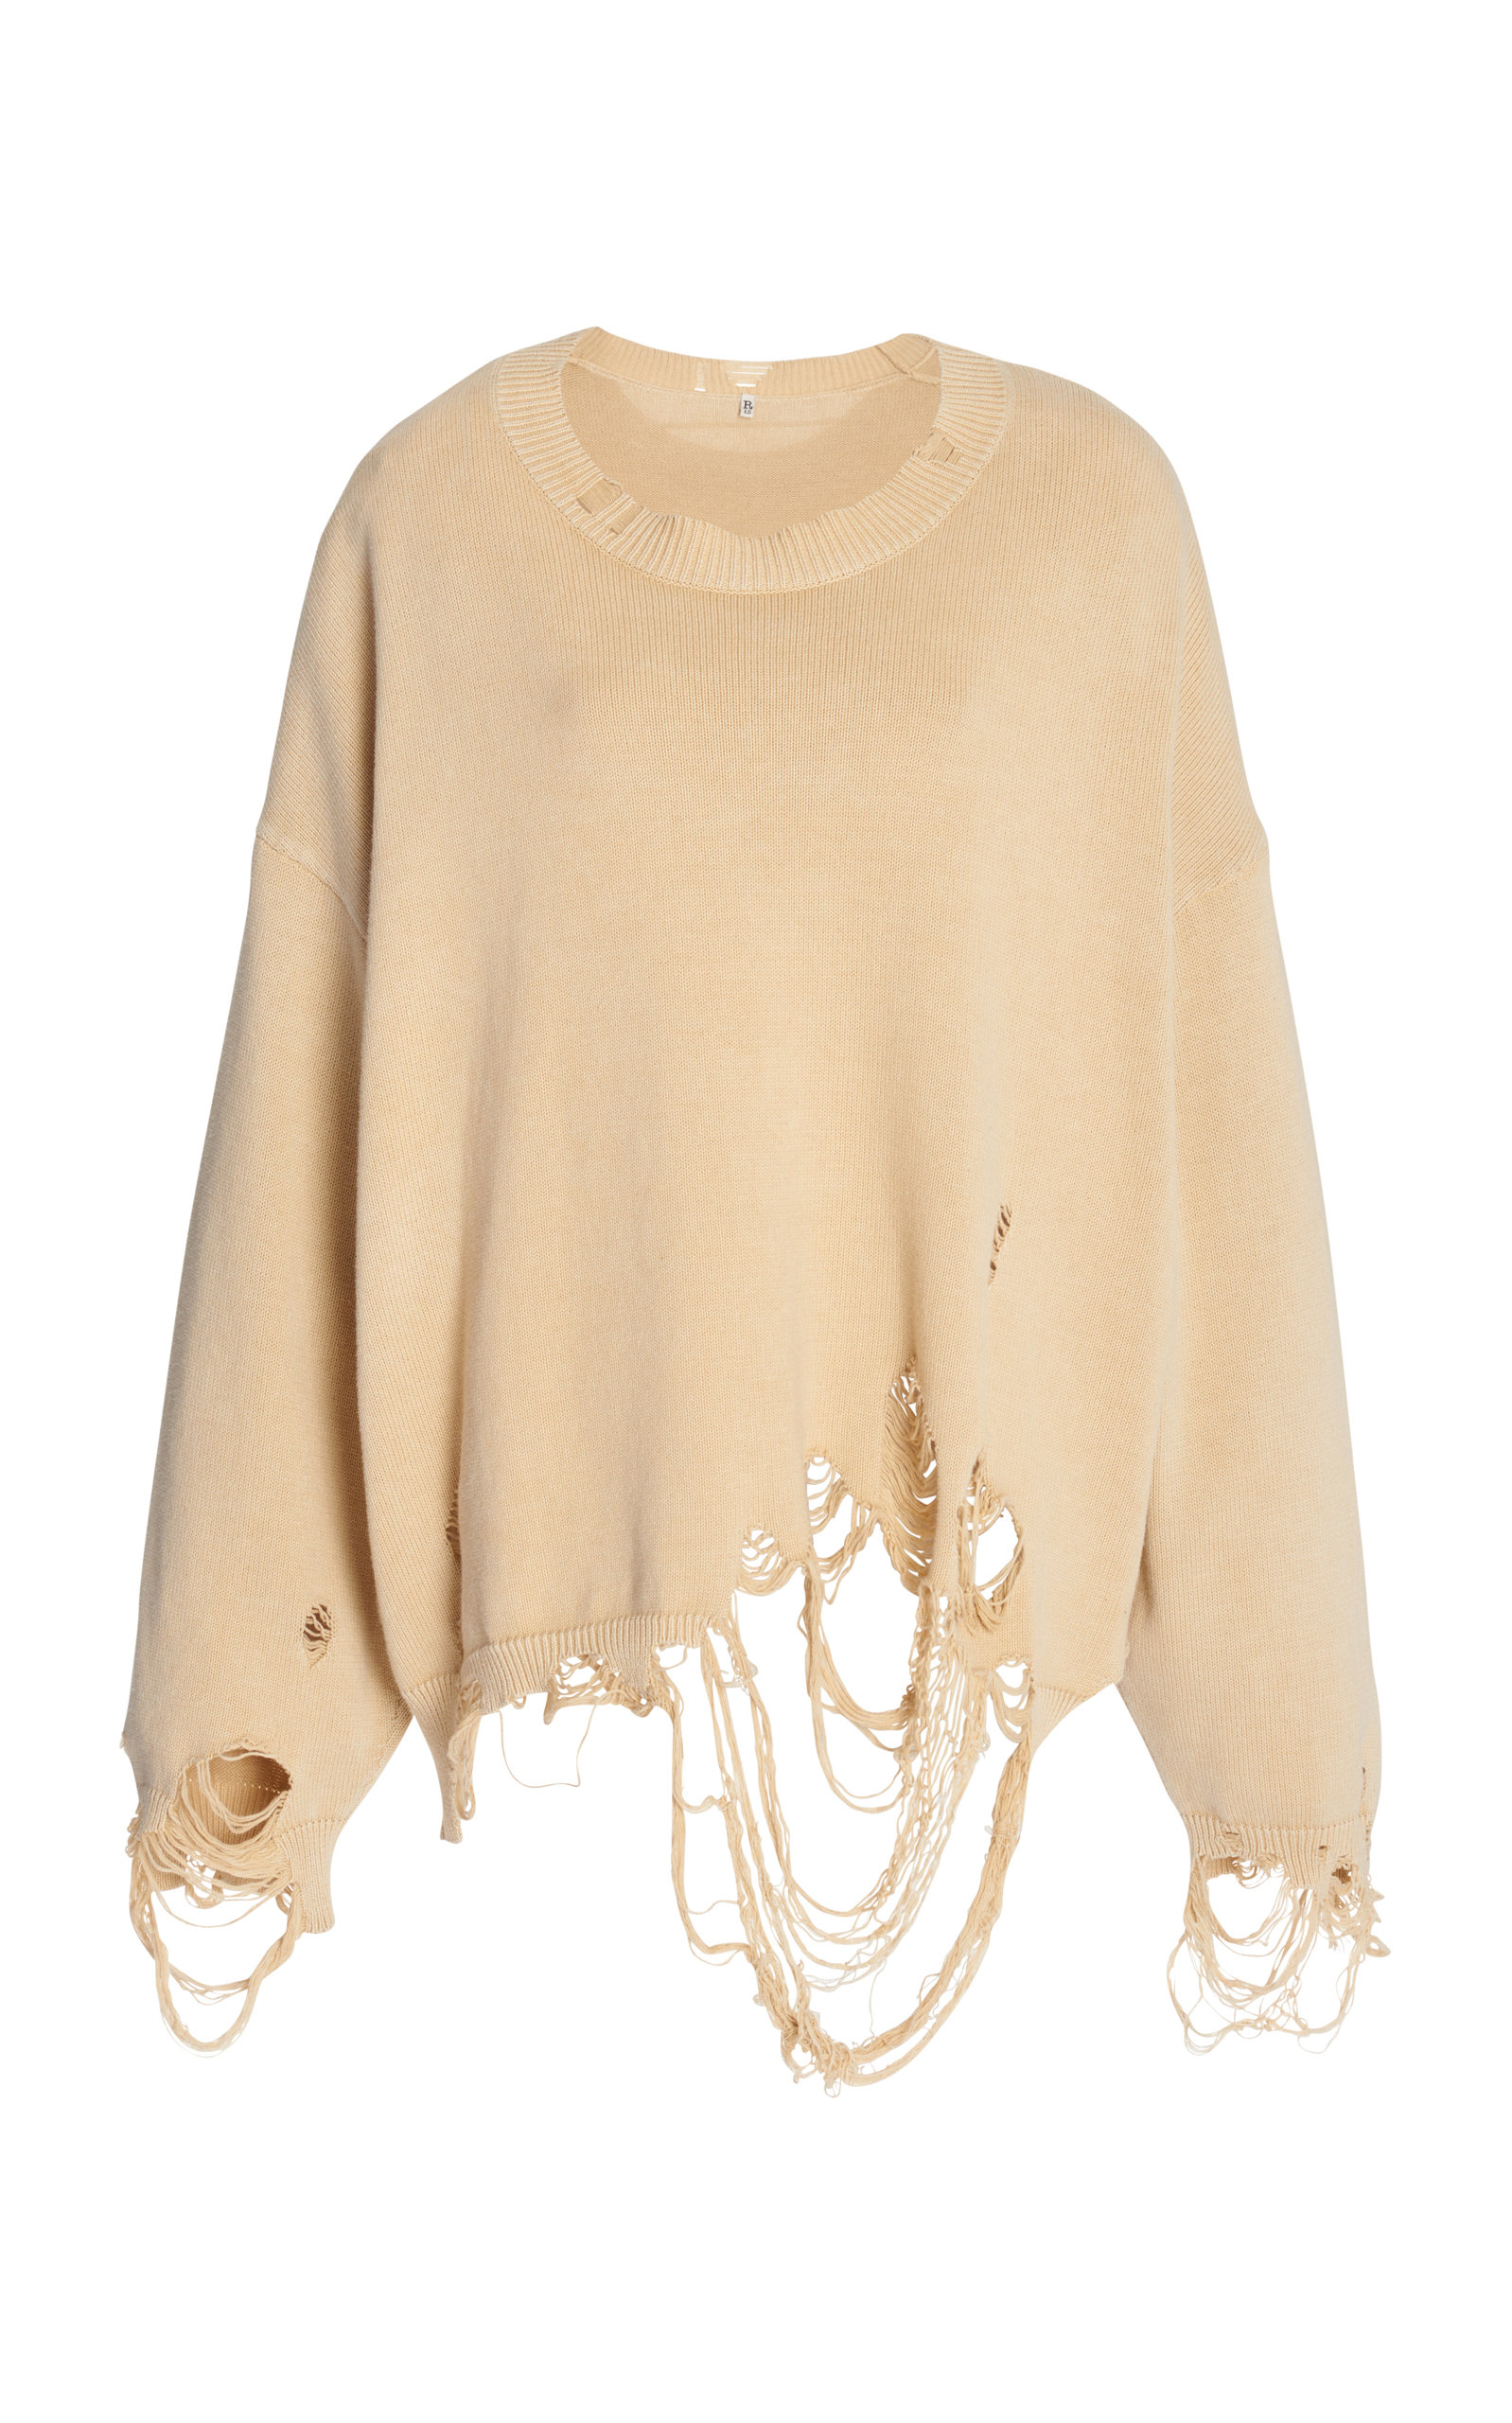 R13 WOMEN'S DISTRESSED OVERSIZED COTTON SWEATER